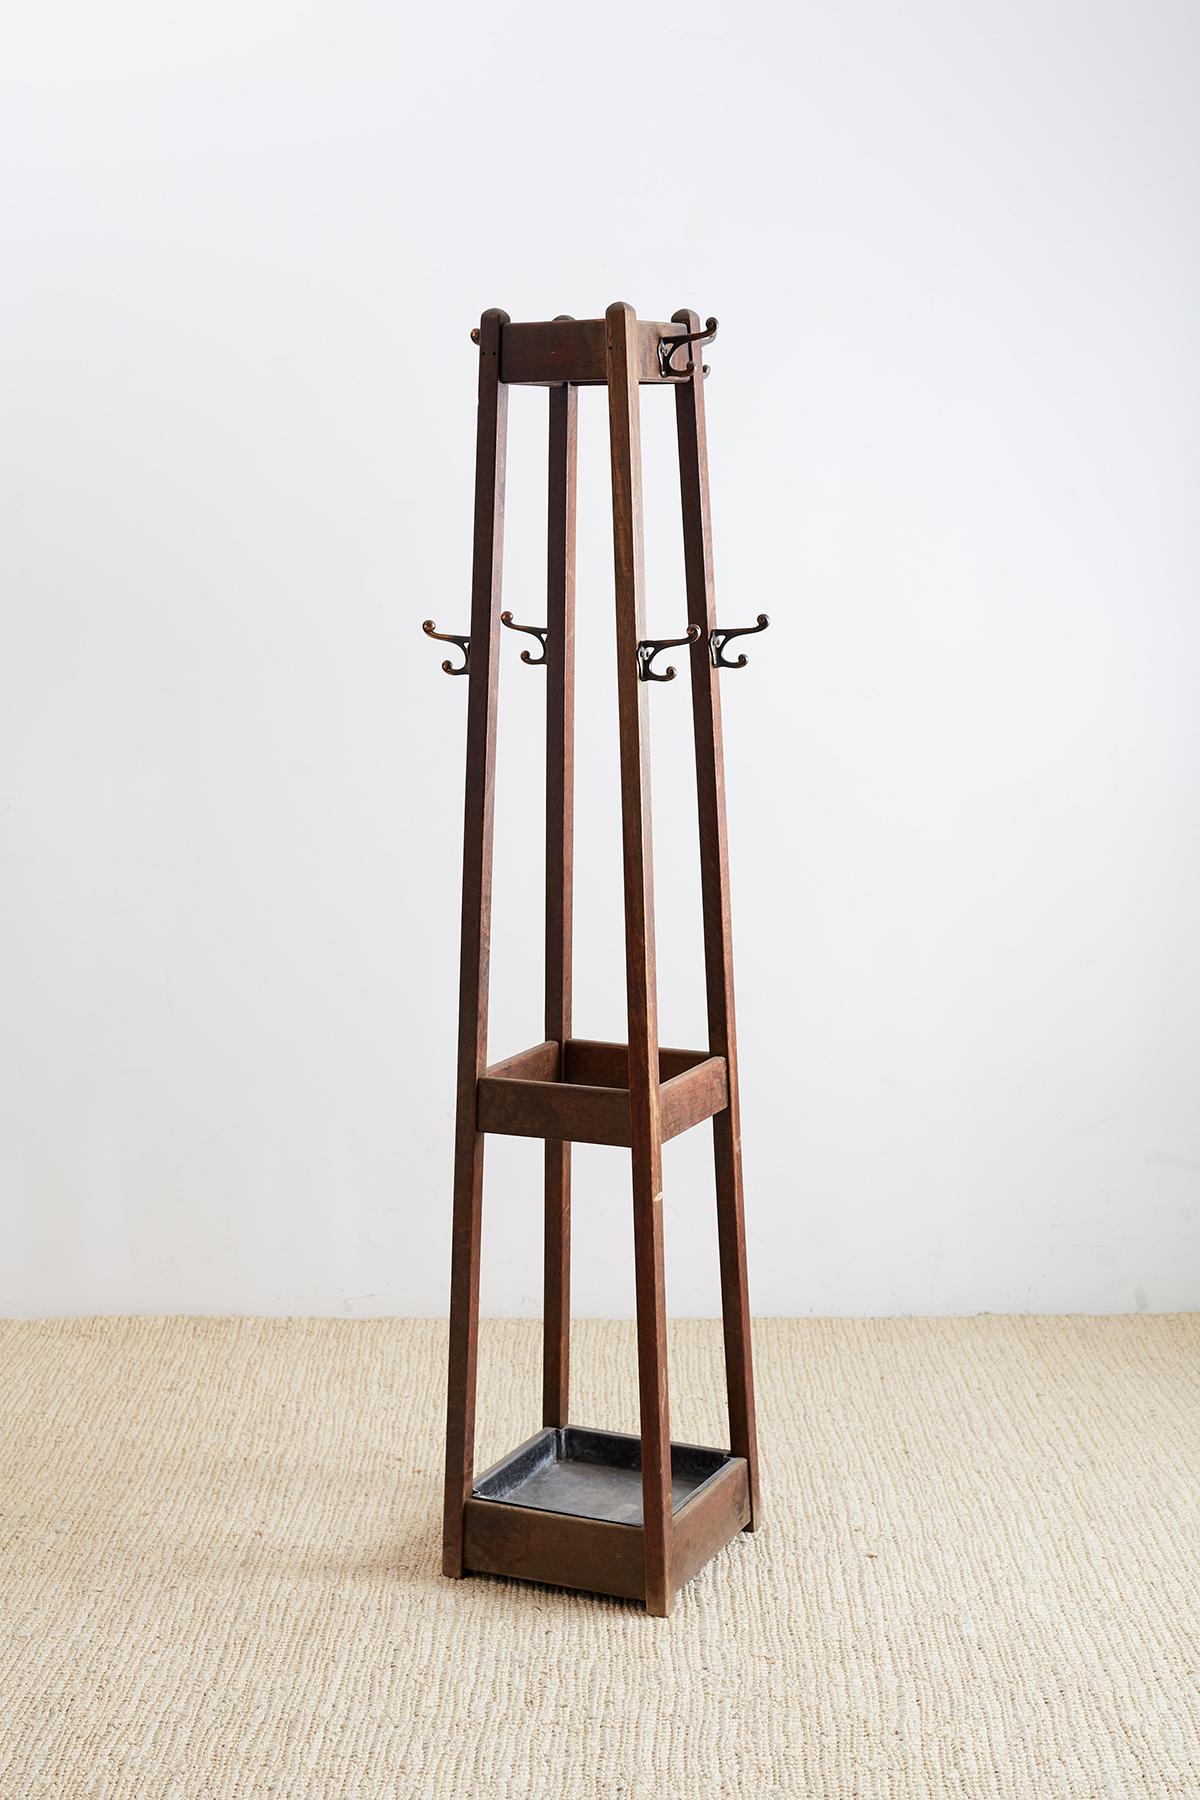 Distinctive English Arts & Crafts hall tree or coat rack featuring a tall tapered oak frame. 8 coat hooks with 4 tall and 4 lower. The bottom of the tree has an umbrella stand with a zinc basin. Unique open design and profile with minimal